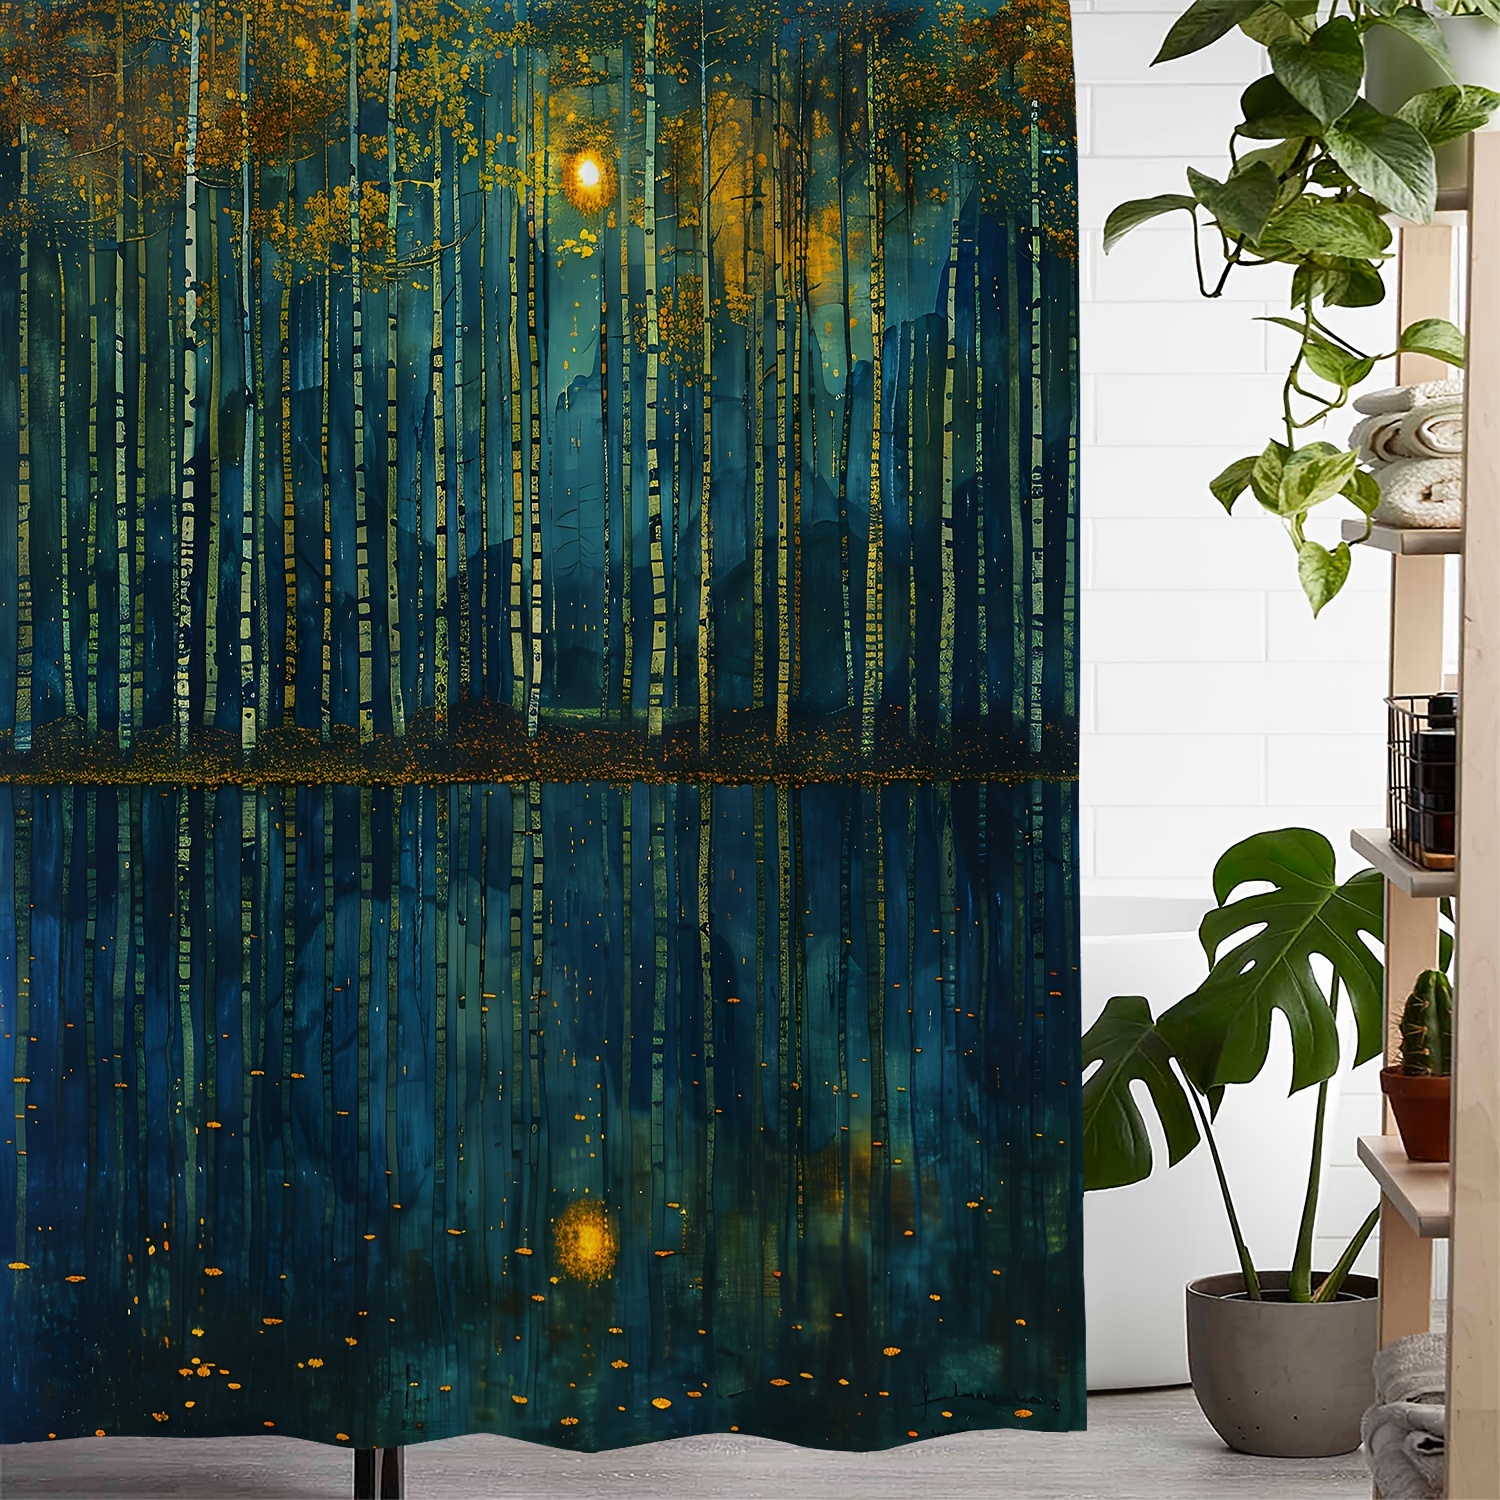 

Ultimate Waterproof Artistic Tree Reflection Shower Curtain With 12 Hooks - Machine Washable, Viscose Fabric, 72"x72" (183cmx183cm)